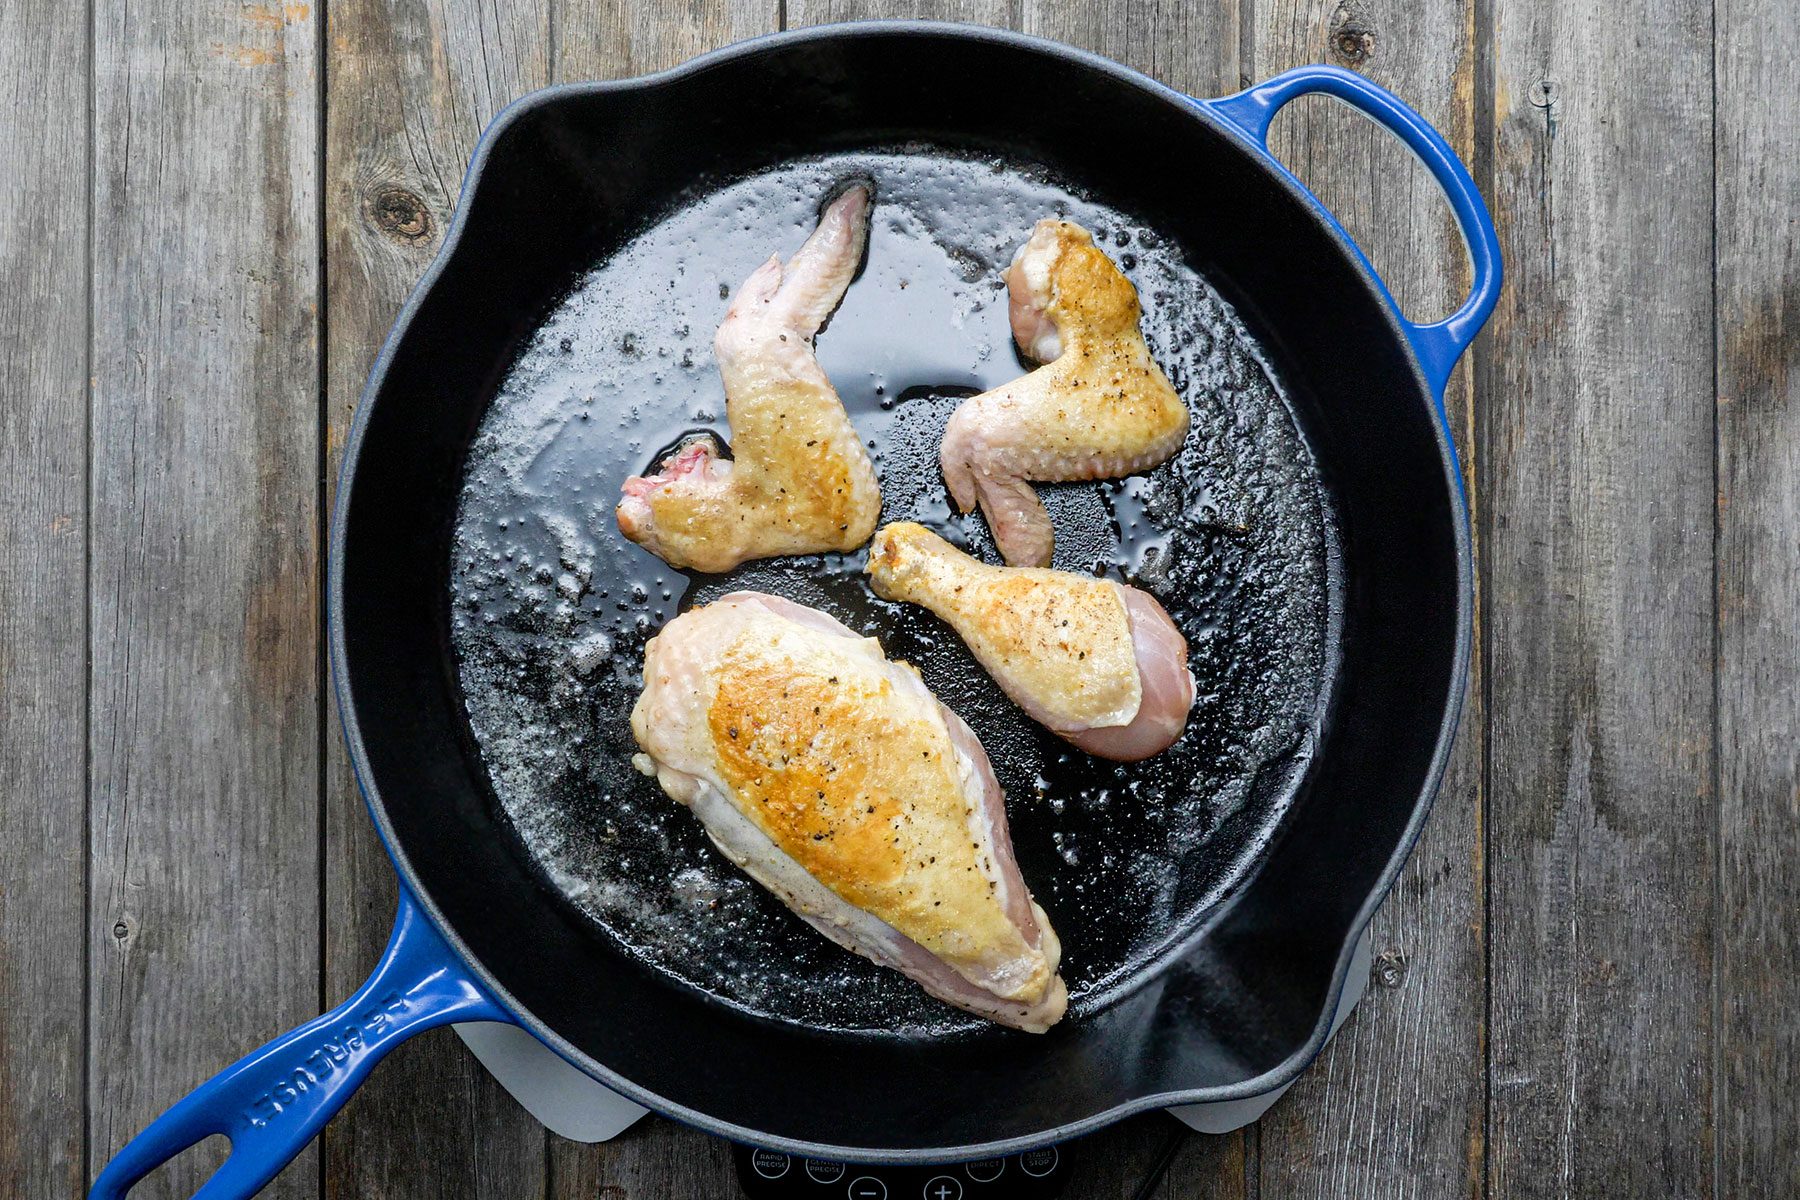 Browning the chicken on large skillet